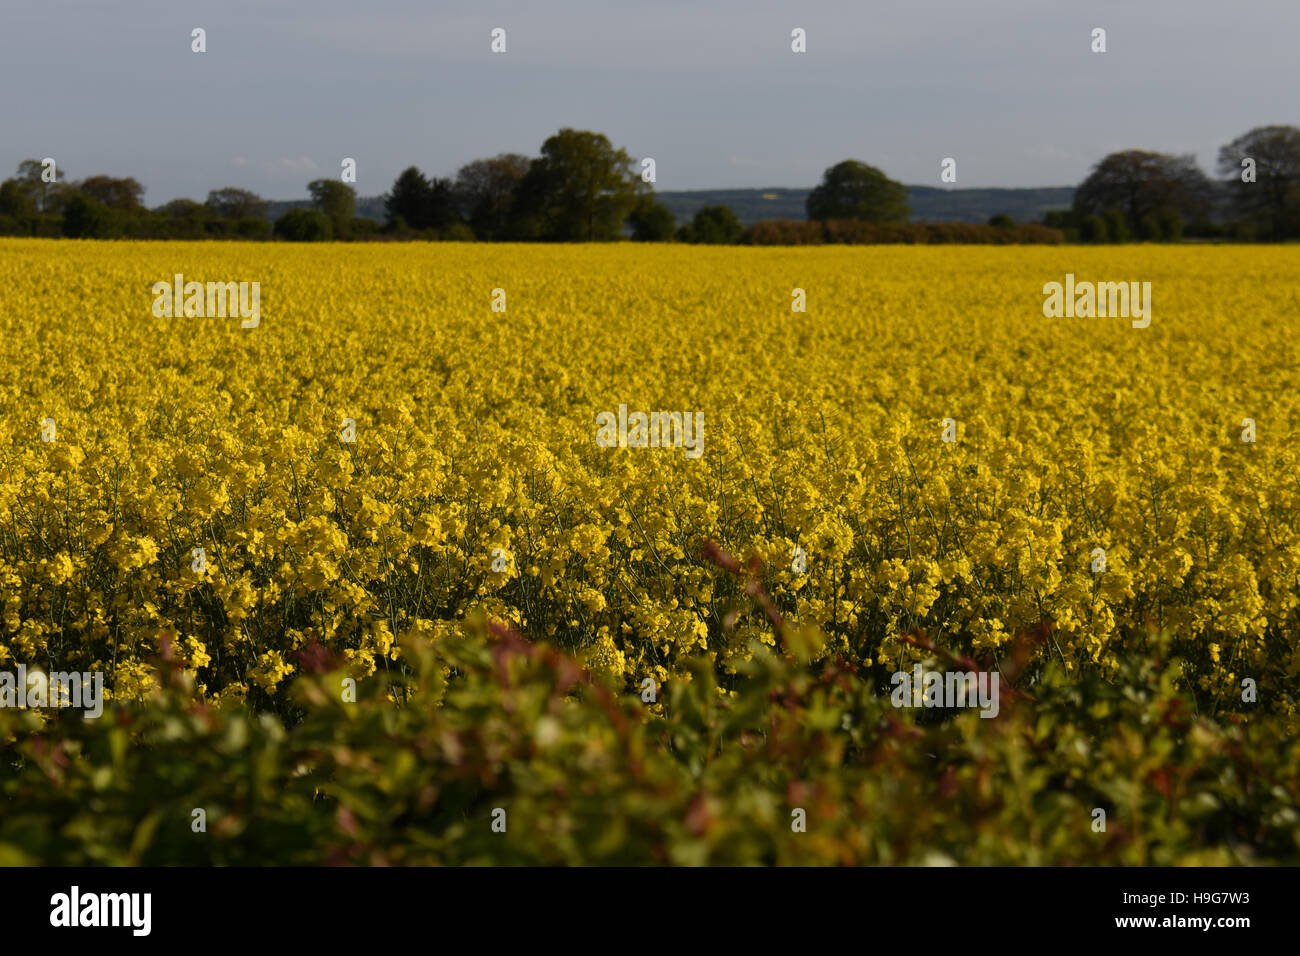 Oilseed rape crop looking healthy and ready to harvest Stock Photo